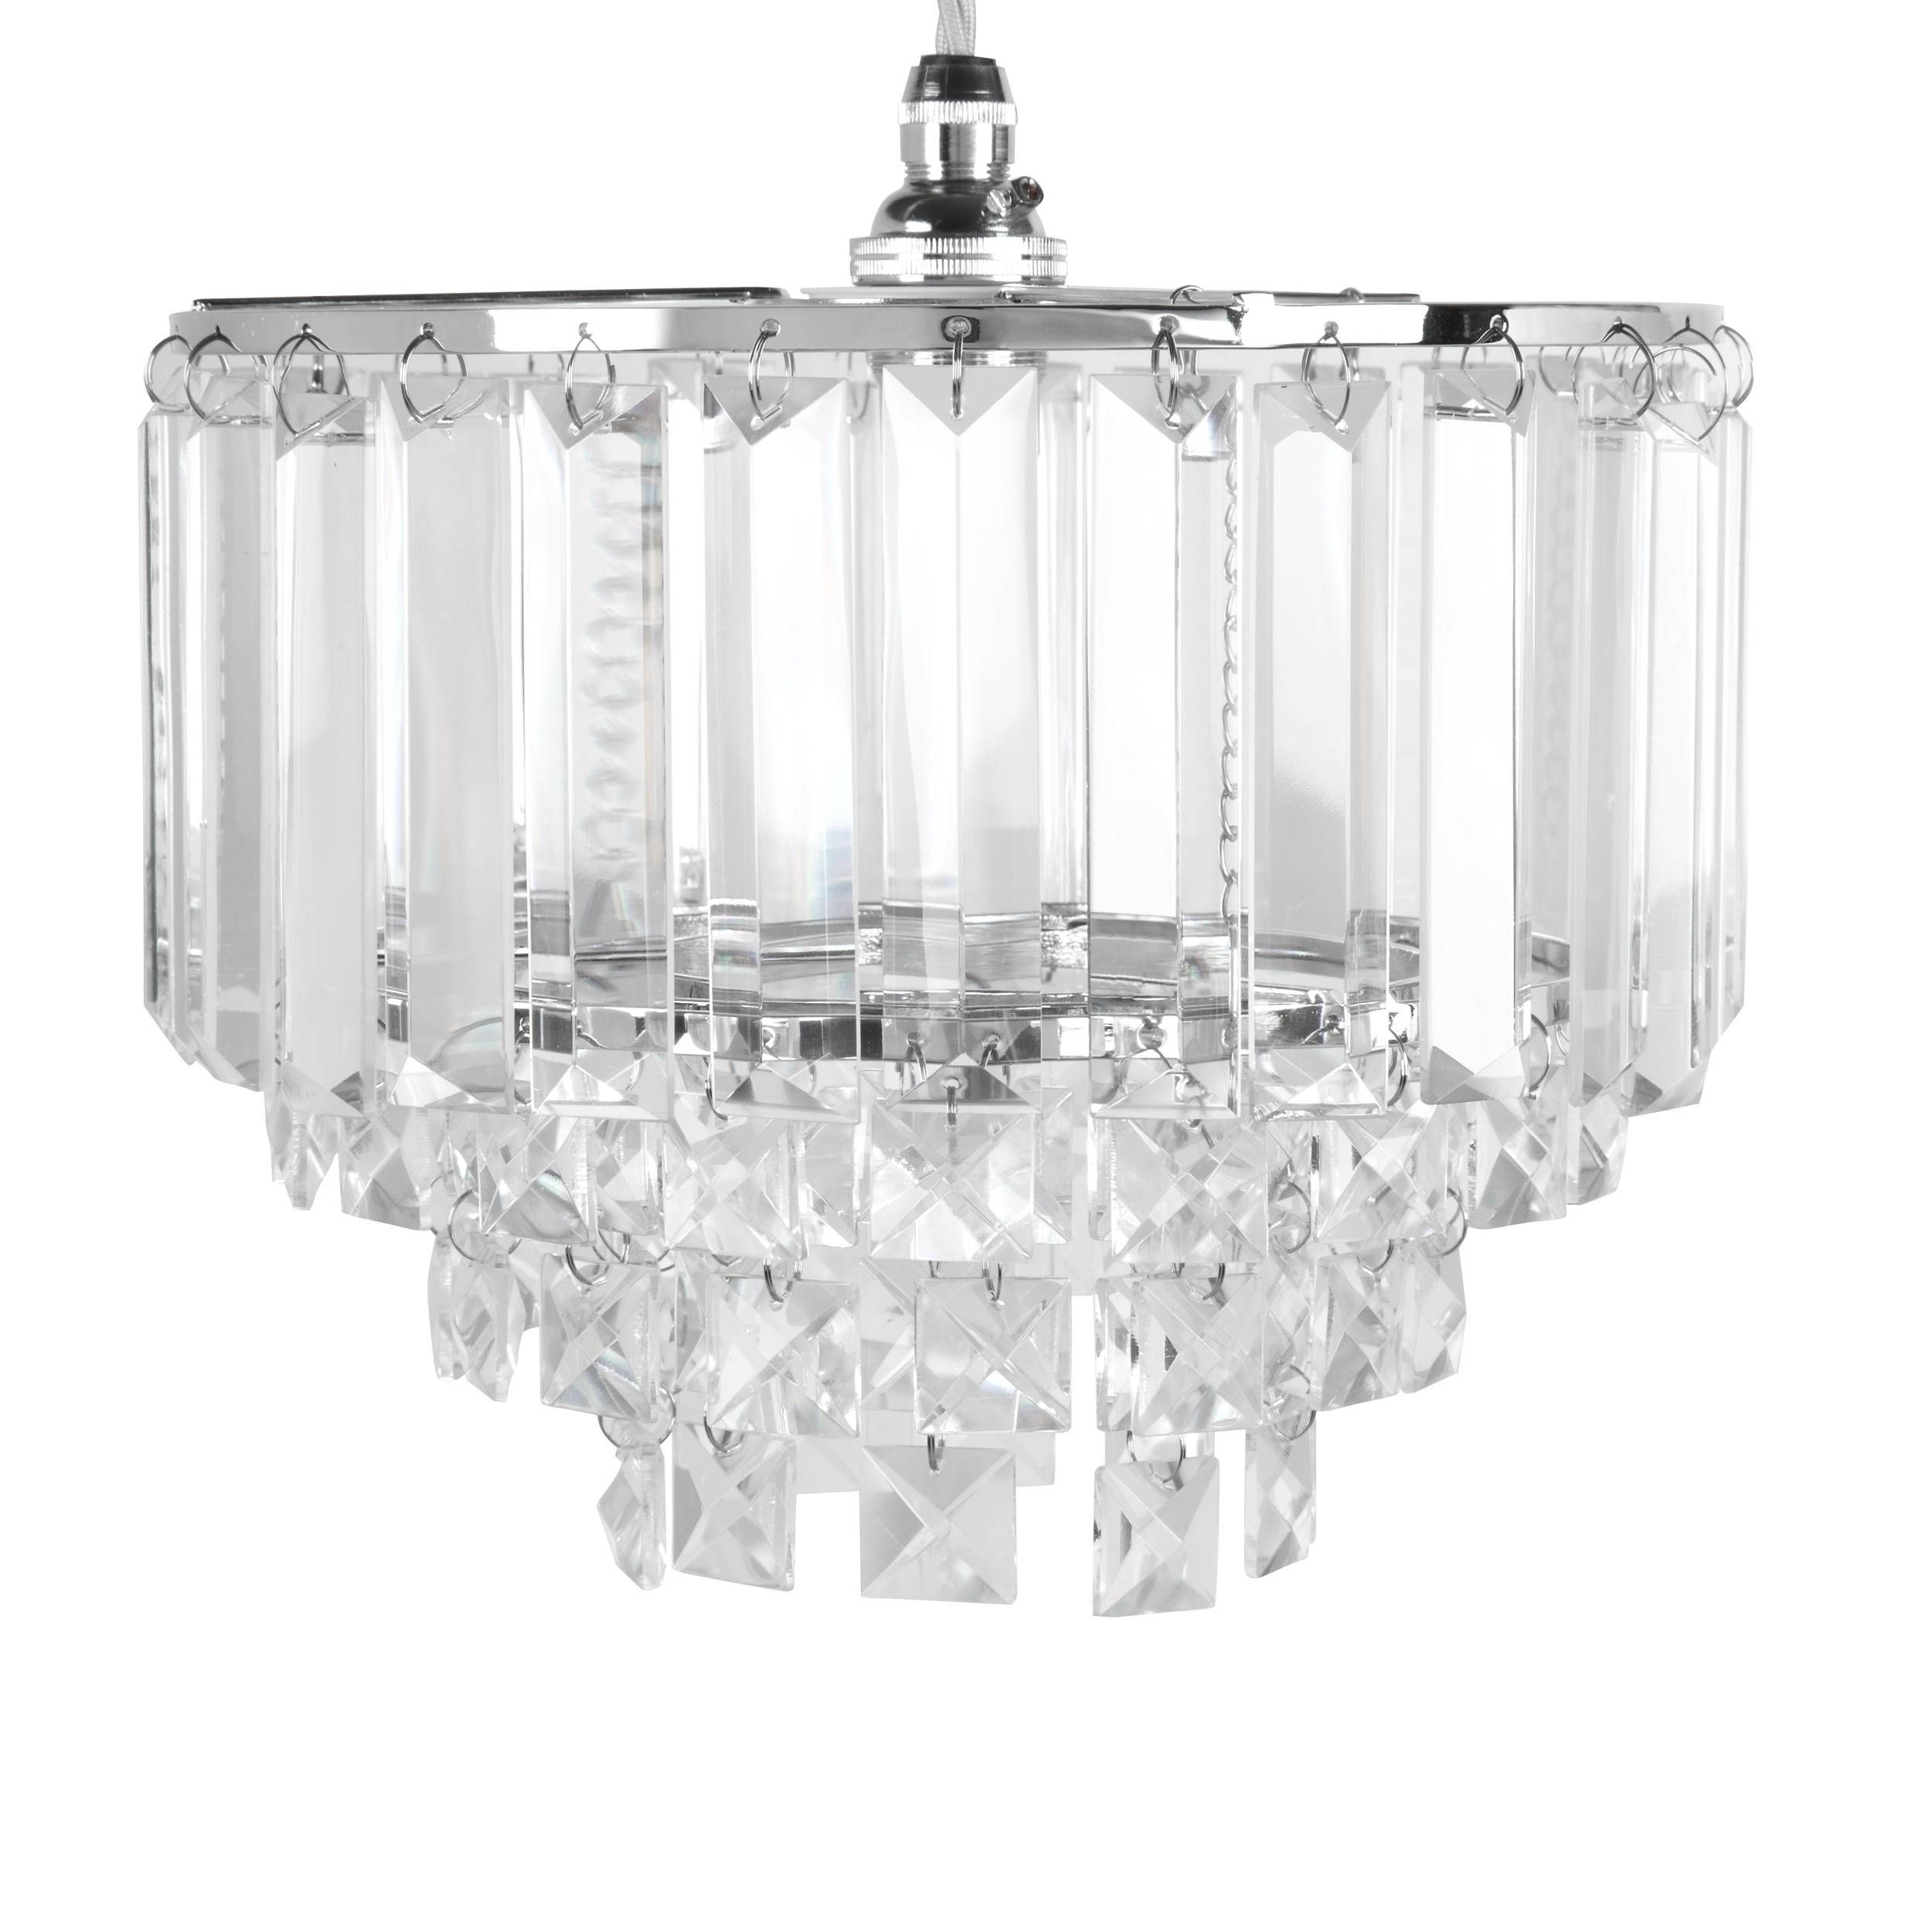 Vienna Easy Fit Pendant Light At Laura Ashley Intended For Easy Fit Pendant Lights (View 2 of 15)